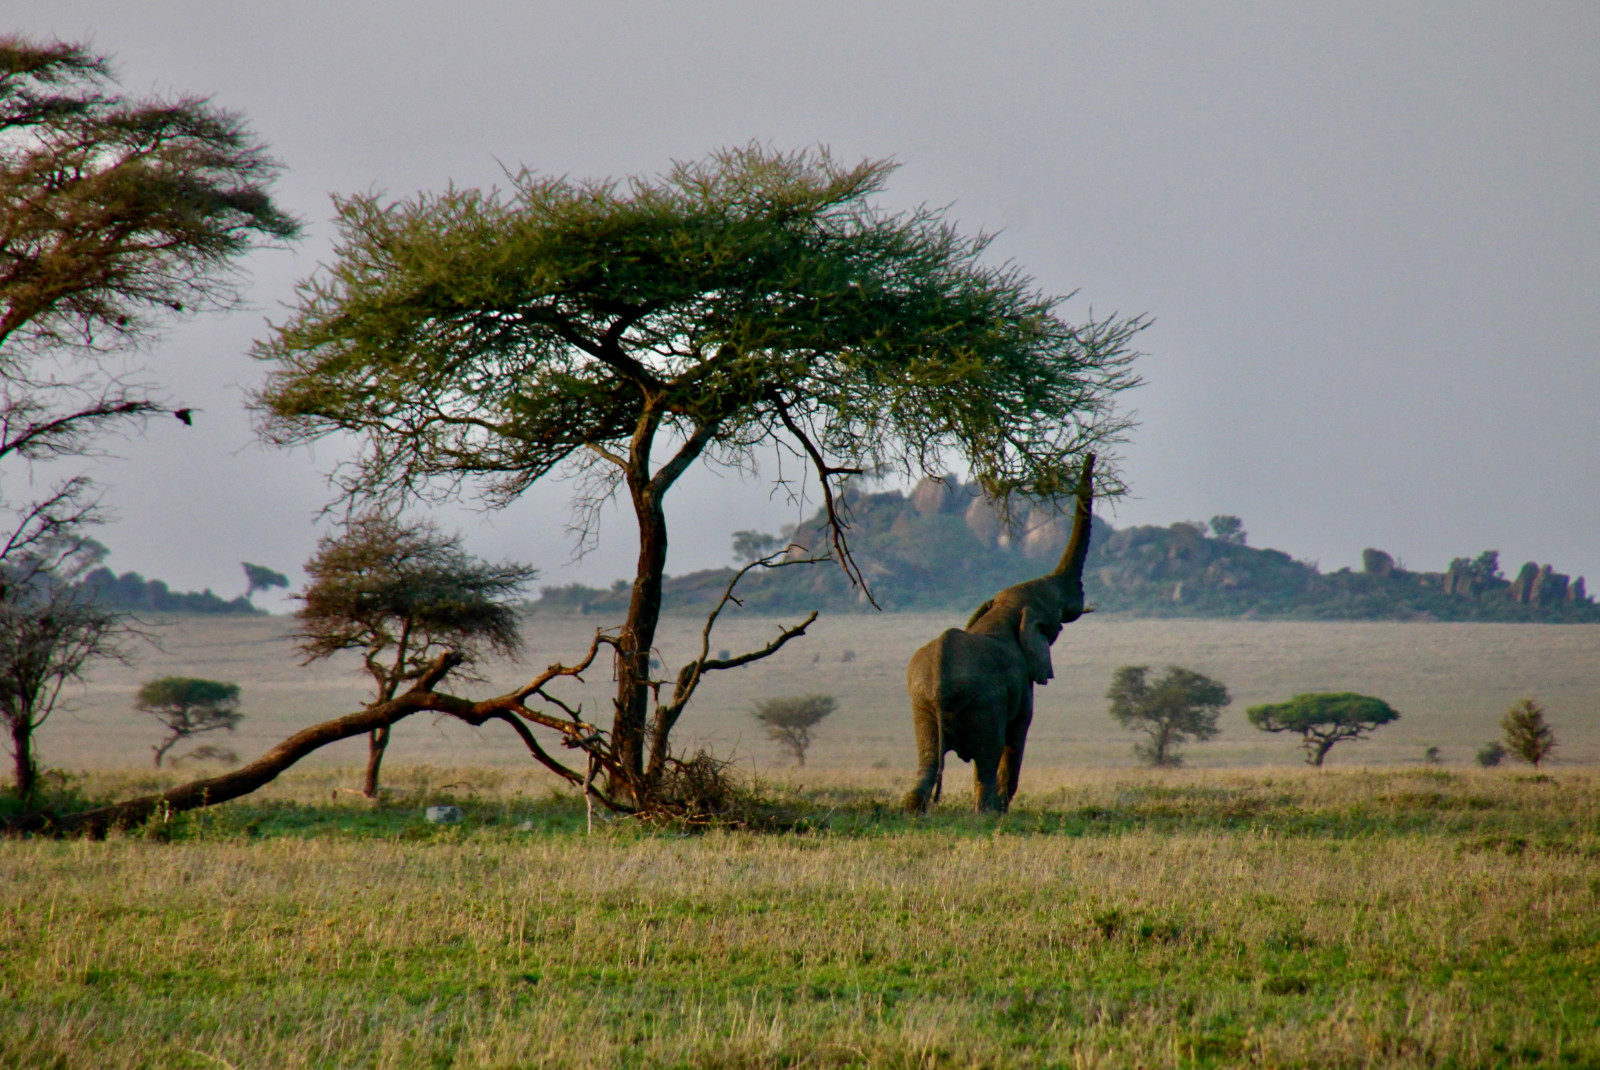 Single elephant raising trunk in a green grass field with a few small trees